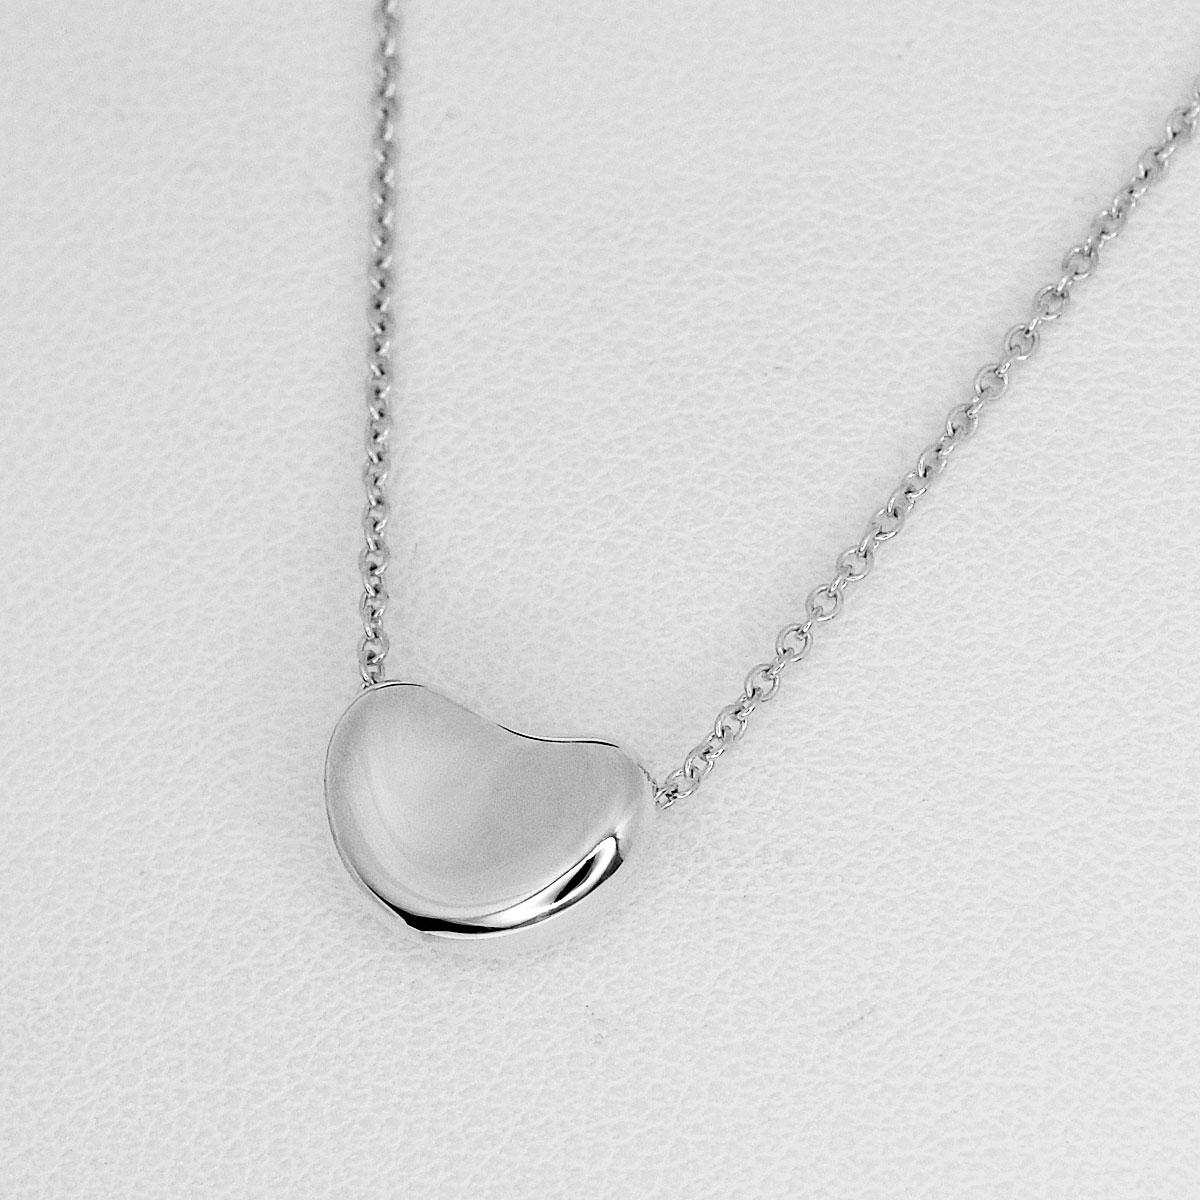 Brand:TIFFANY&Co.
Name:Bean pendant necklace
Material:Sterling Silver 
Weight:3.0g（Approx)
neck around:41cm / 16.14in（Approx)
Top size:H7.79mm×W12mm / 0.30in×W0.47in（Approx)
Comes with:Tiffany pouch